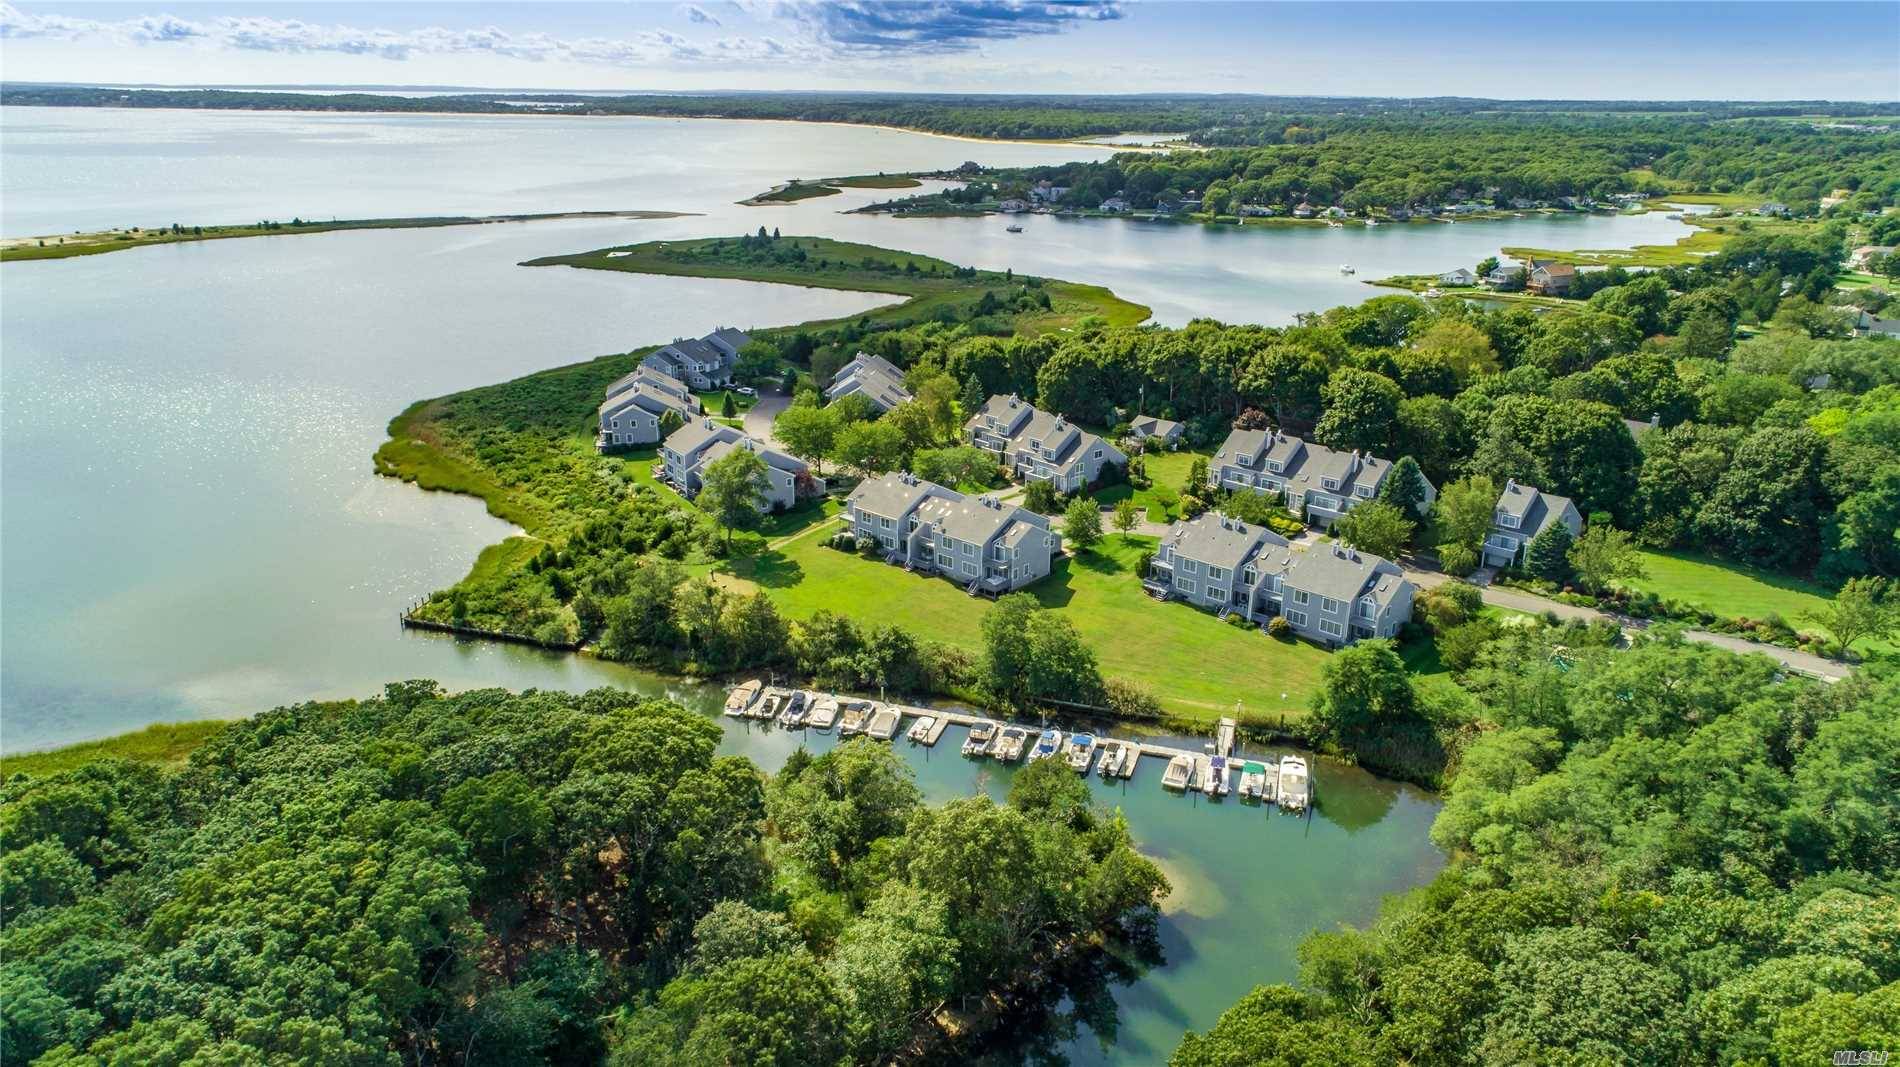 Enjoy Creek And Bay Views From This End Unit Waterfront Condo In The Cove At Southold.